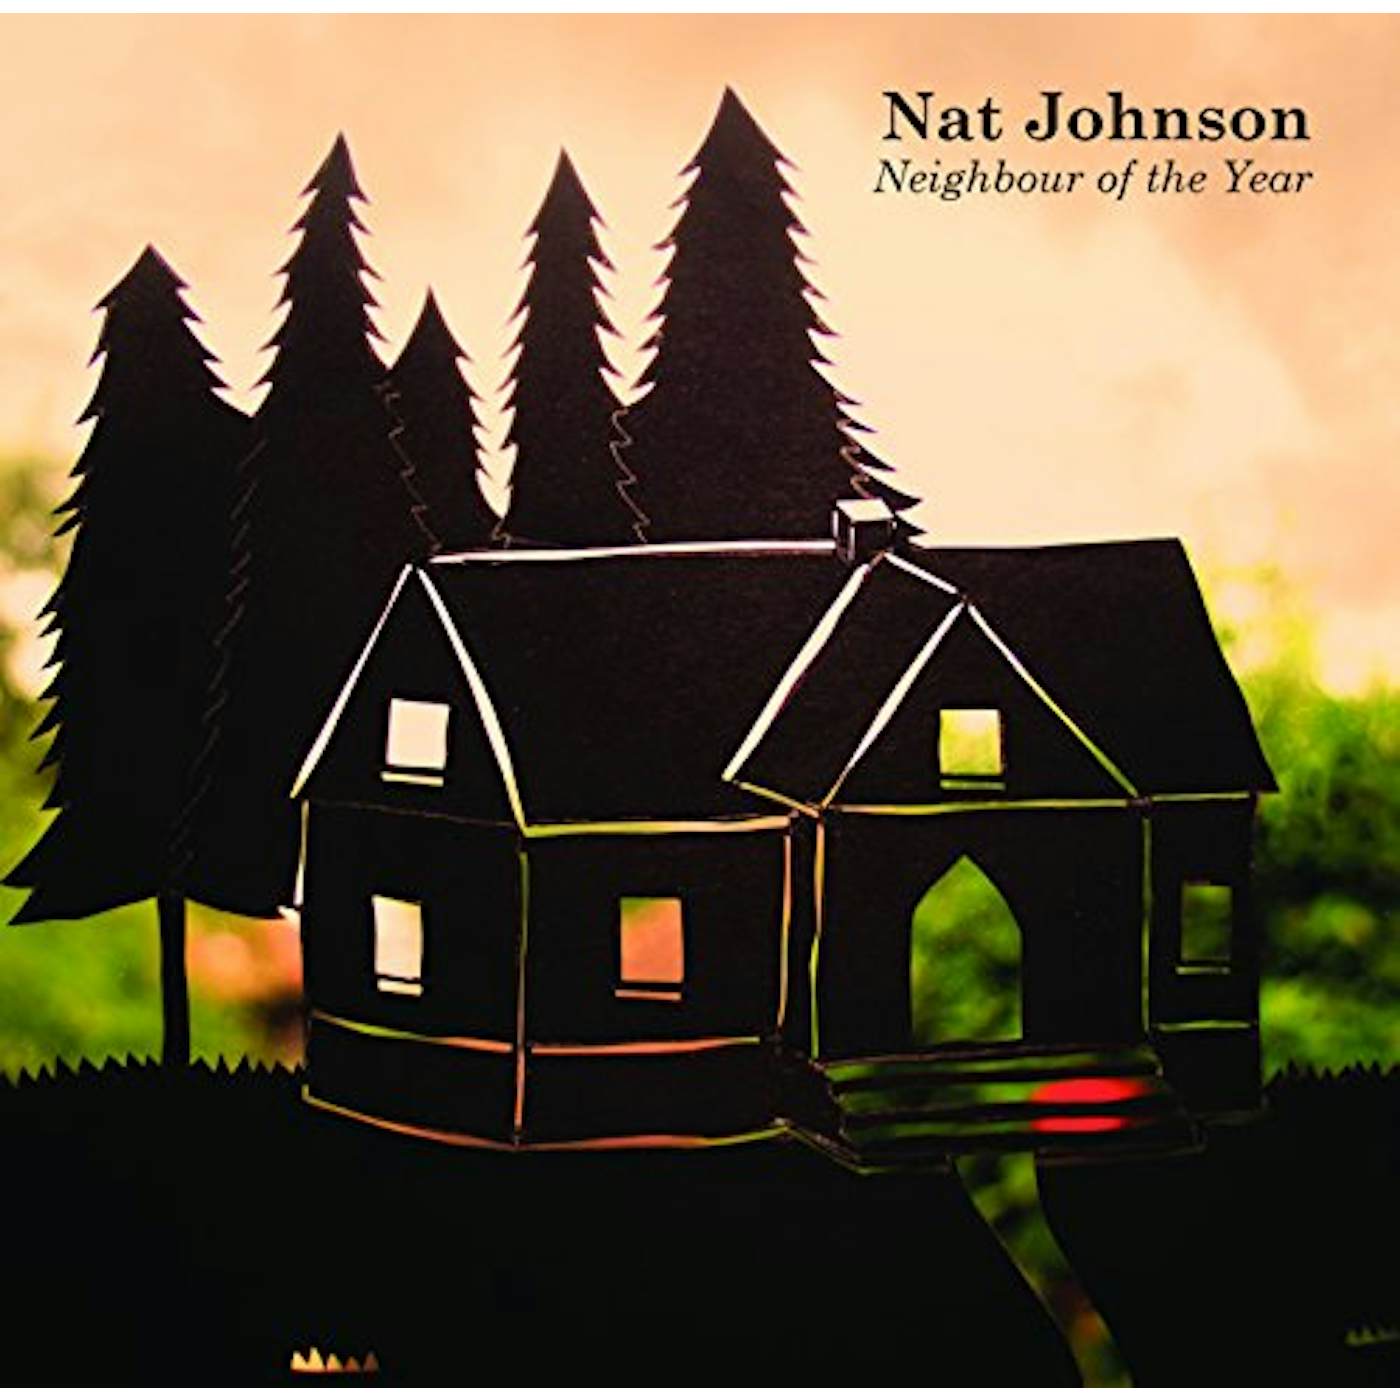 Nat Johnson NEIGHBOUR OF THE YEAR CD